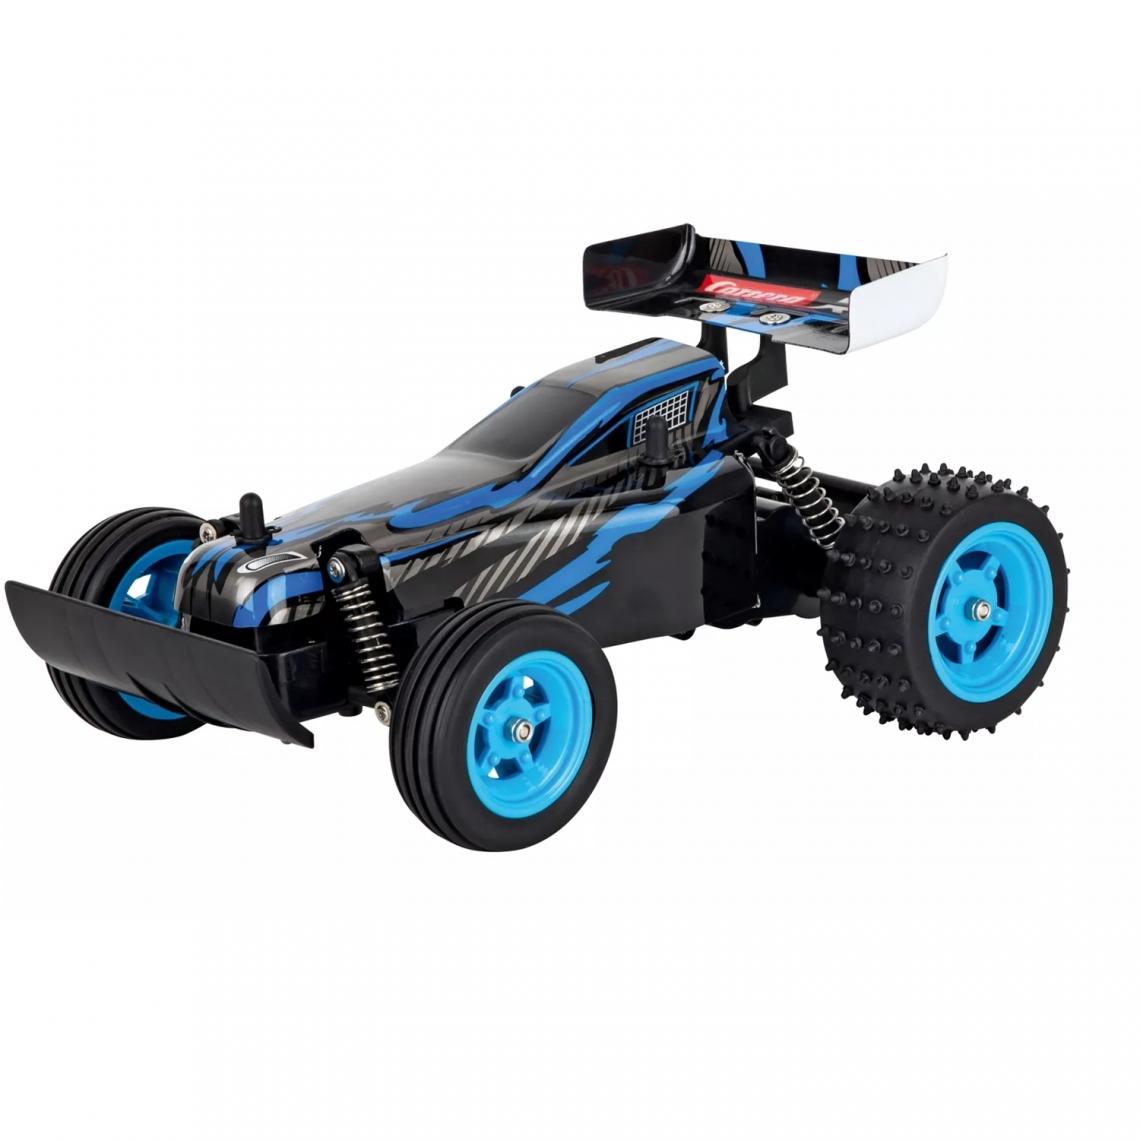 Carrera Montres - CARRERA RC 370180013 - 2,4GHz RC Race Buggy, blau - Voitures RC